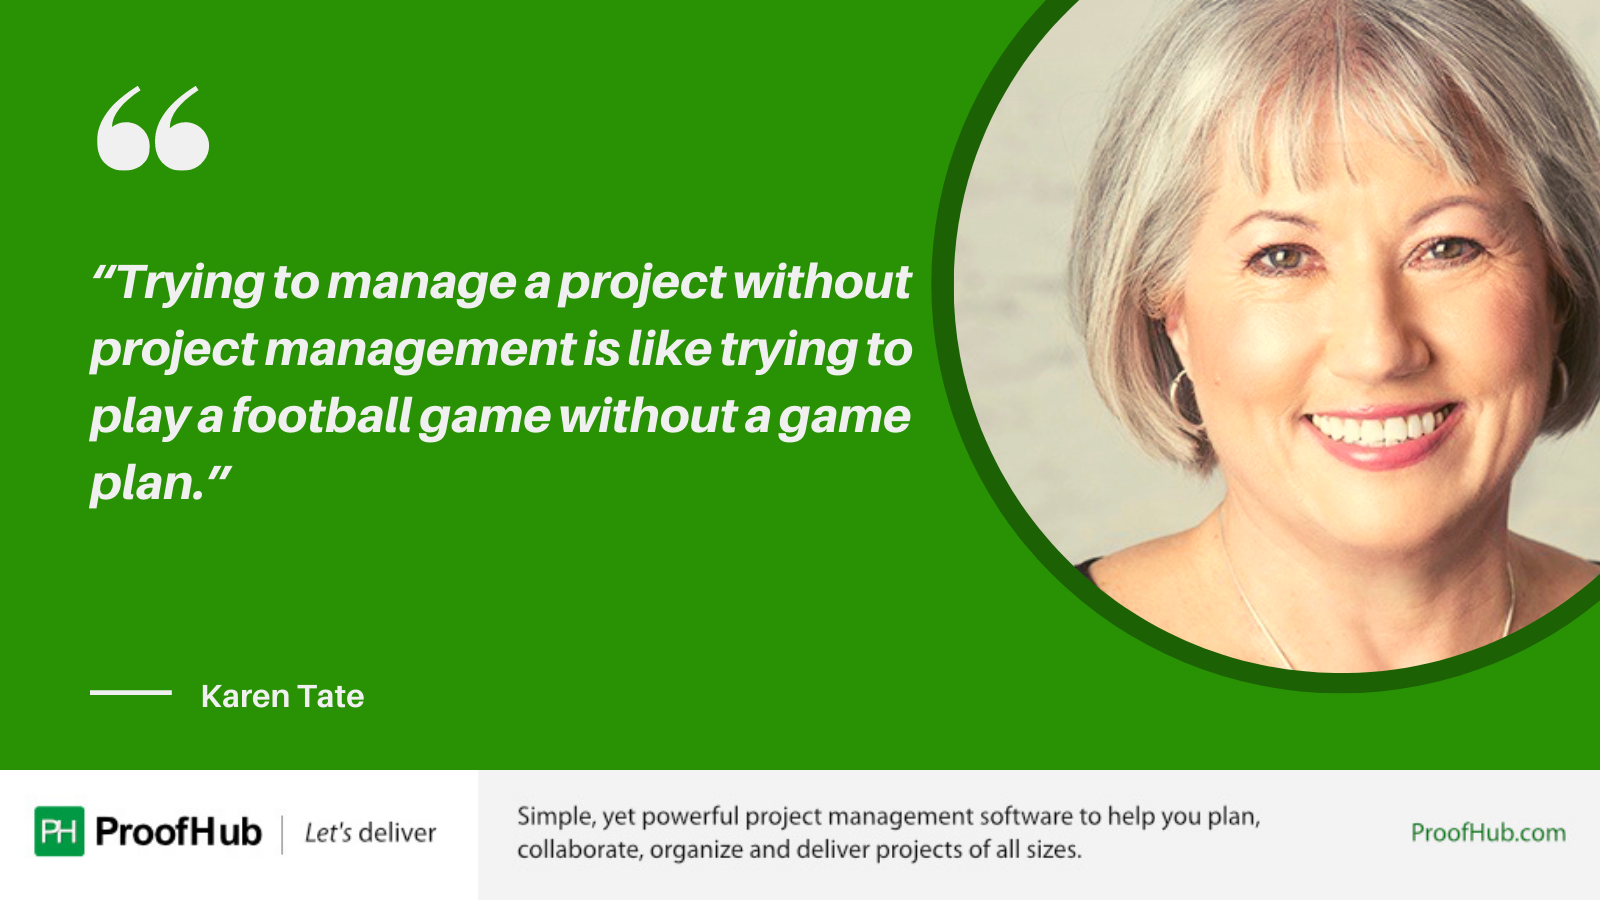 Trying to manage a project without project management is like trying to play a football game without a game plan quote by Karen Tate